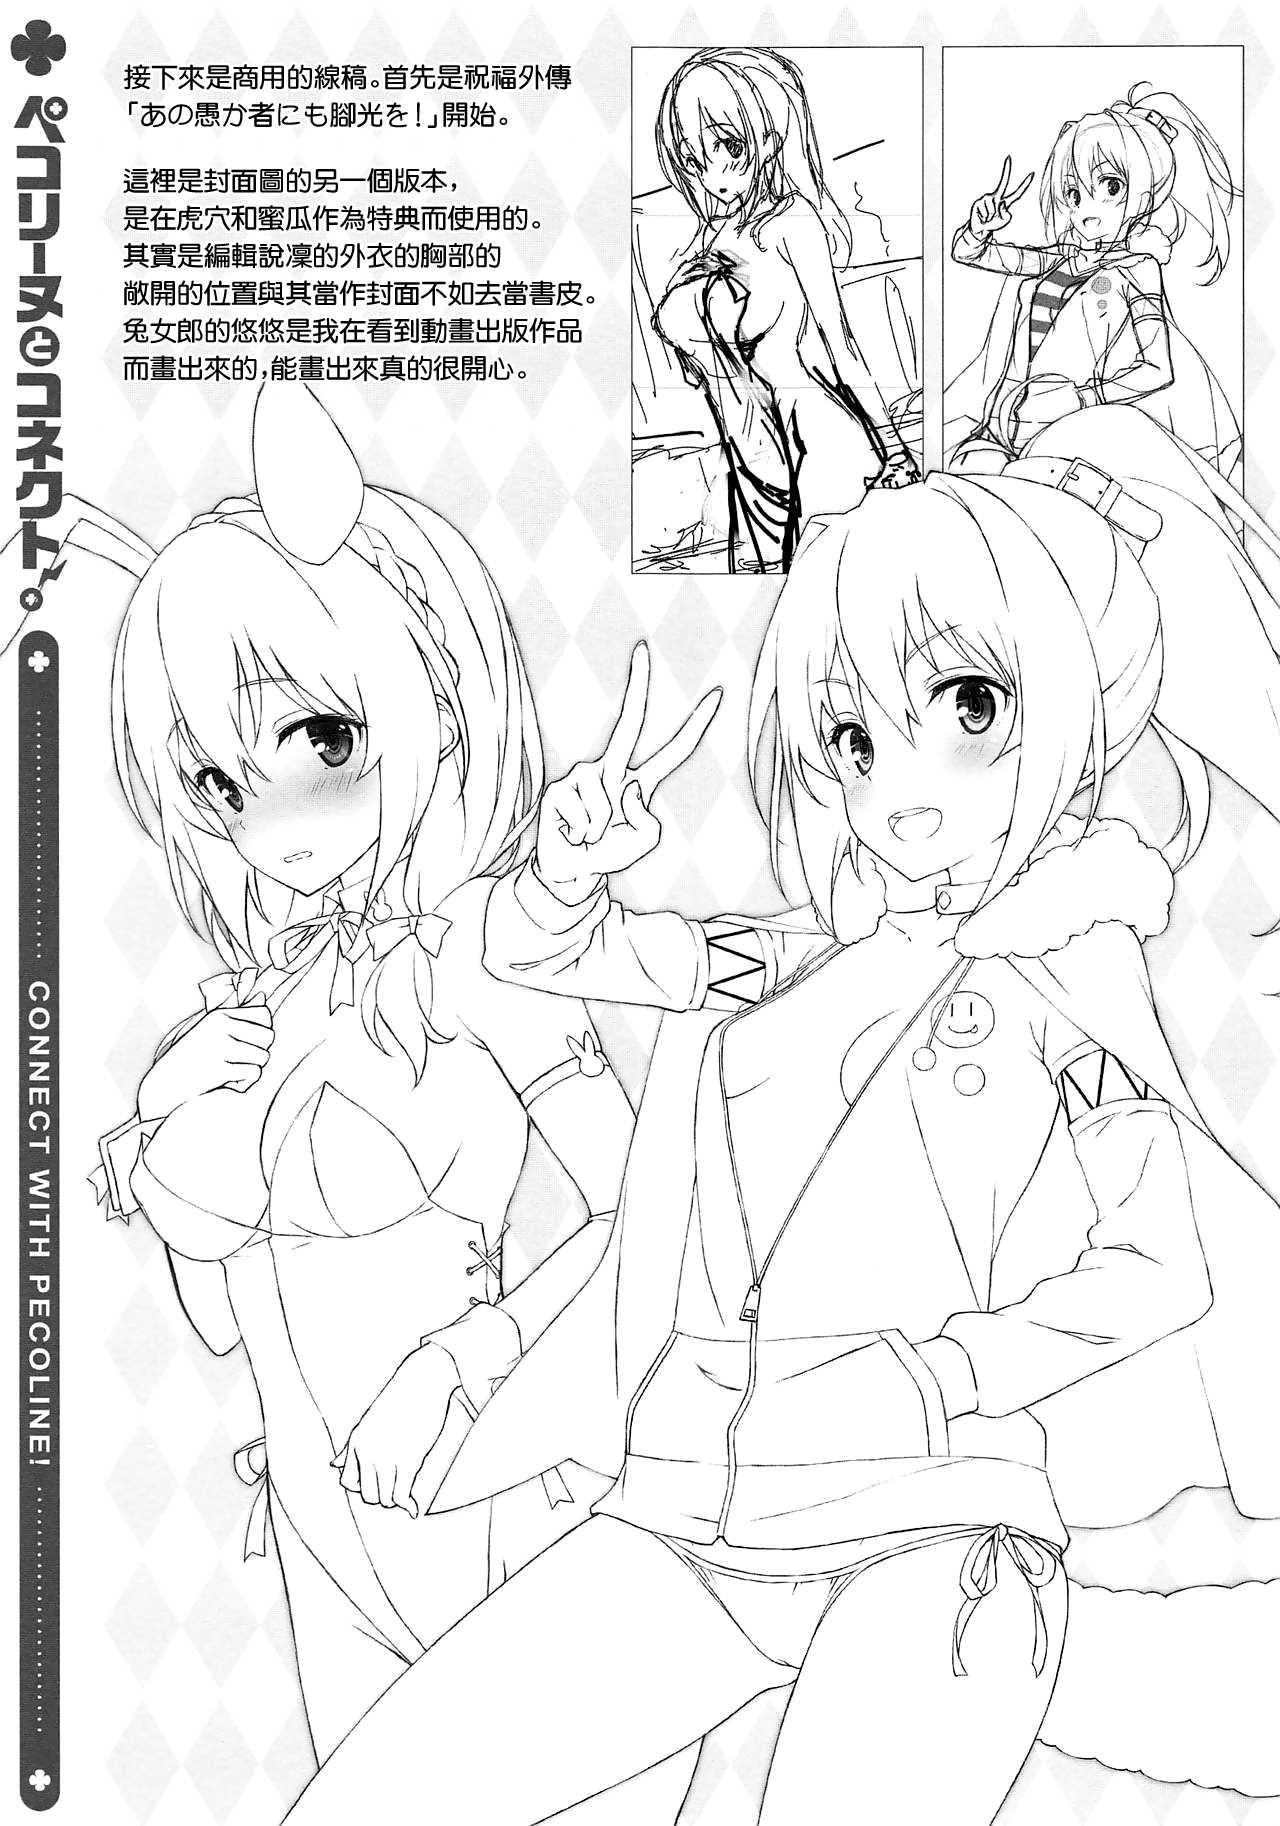 (COMIC1☆13) [WIREFRAME (Yuuki Hagure)] Pecorine to Connect. (Princess Connect! Re:Dive)[Chinese] [洛鳶漢化組] (COMIC1☆13) [WIREFRAME (憂姫はぐれ)] ペコリーヌとコネクト。 (プリンセスコネクト!Re:Dive) [中国翻訳]